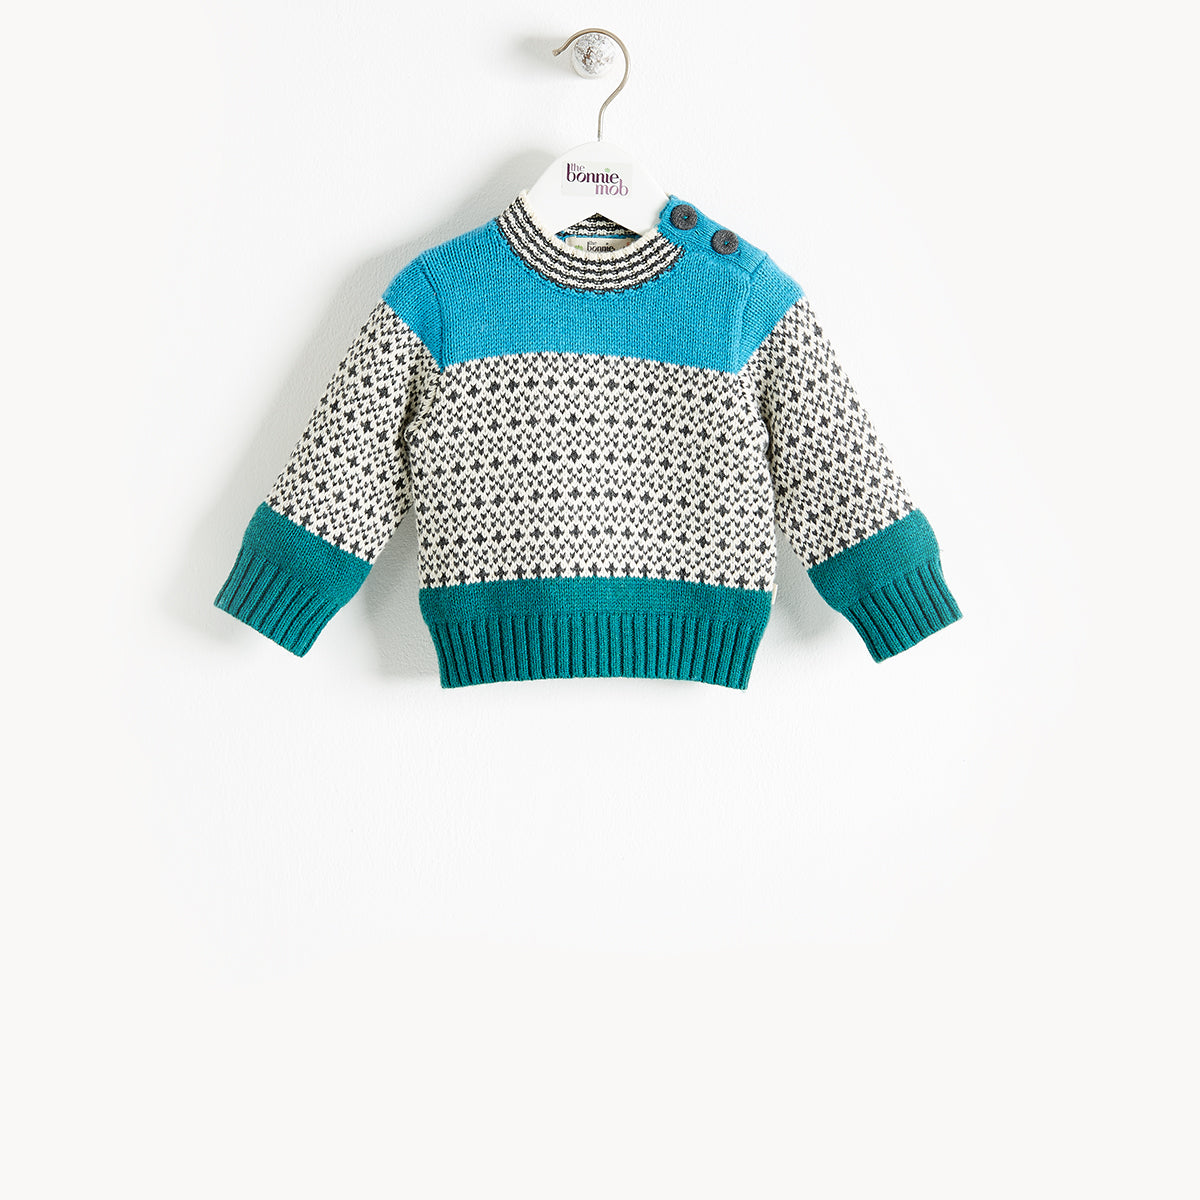 SWEATER - BABY - 3 COLOR (YELLOWS/GREENS/PINKS) - LAURIE